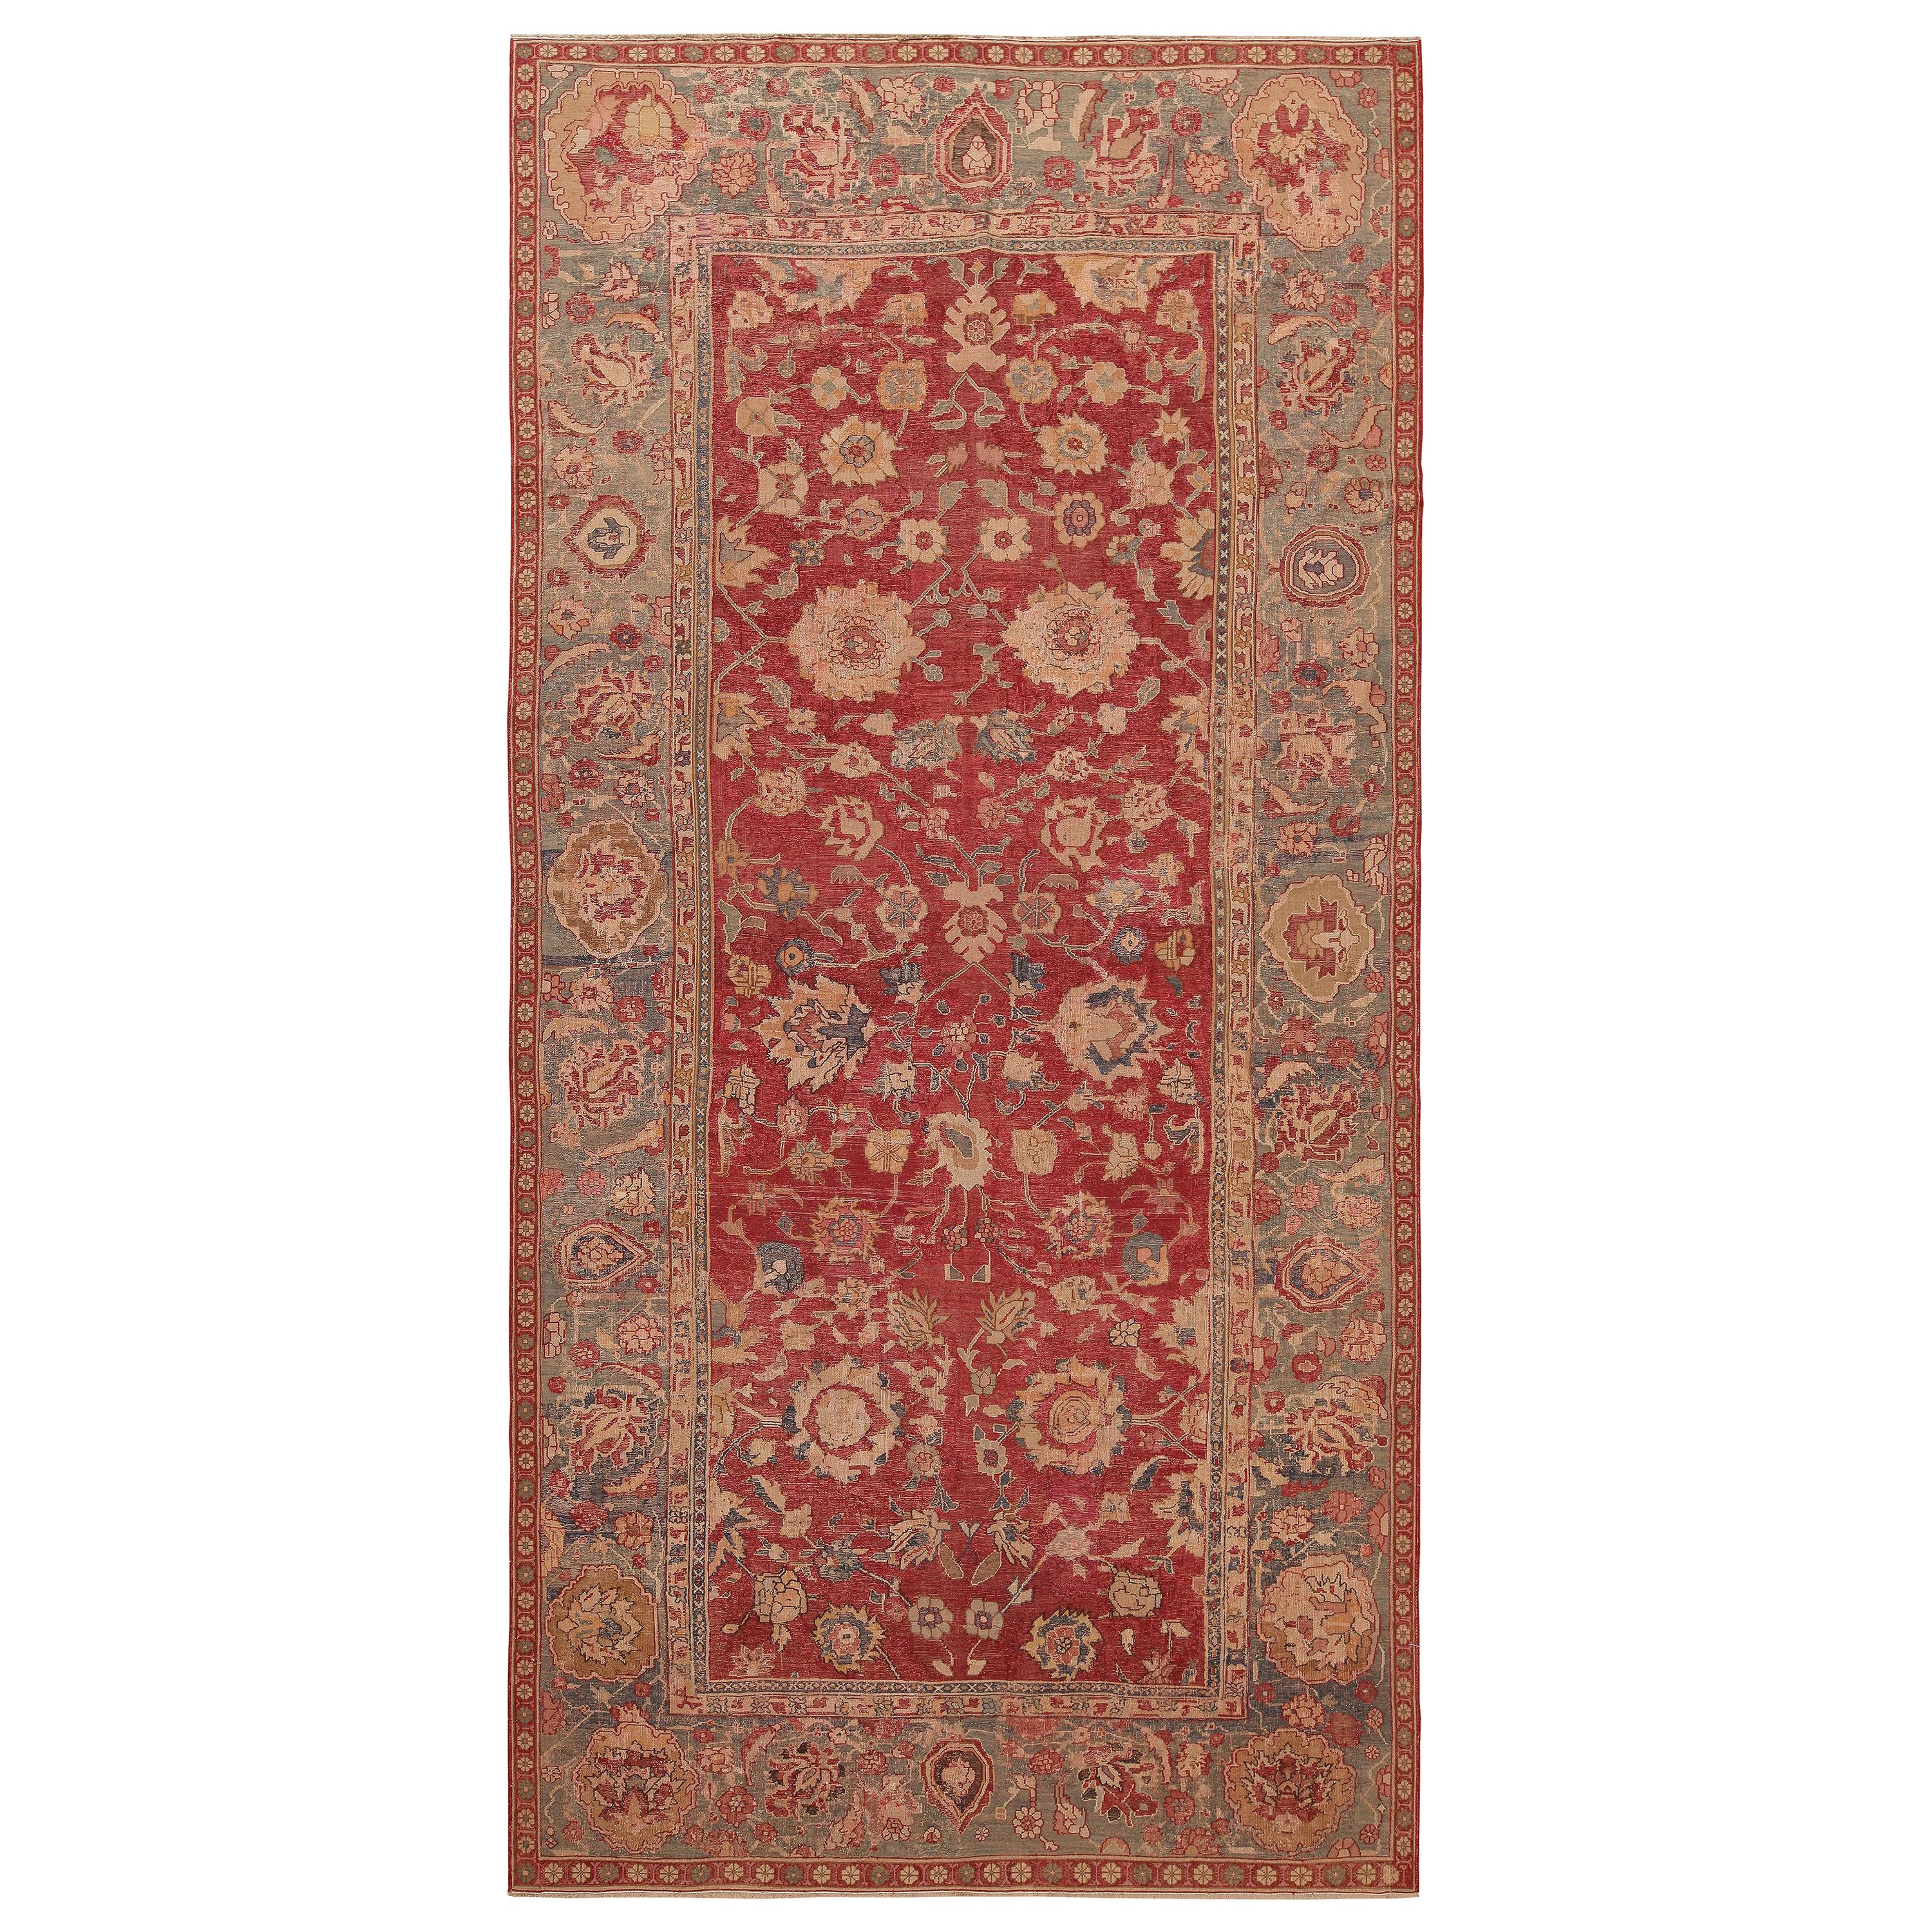 Nazmiyal Collection 17th Century Antique Indian Mughal Rug 6 ft 7 in x 13 ft